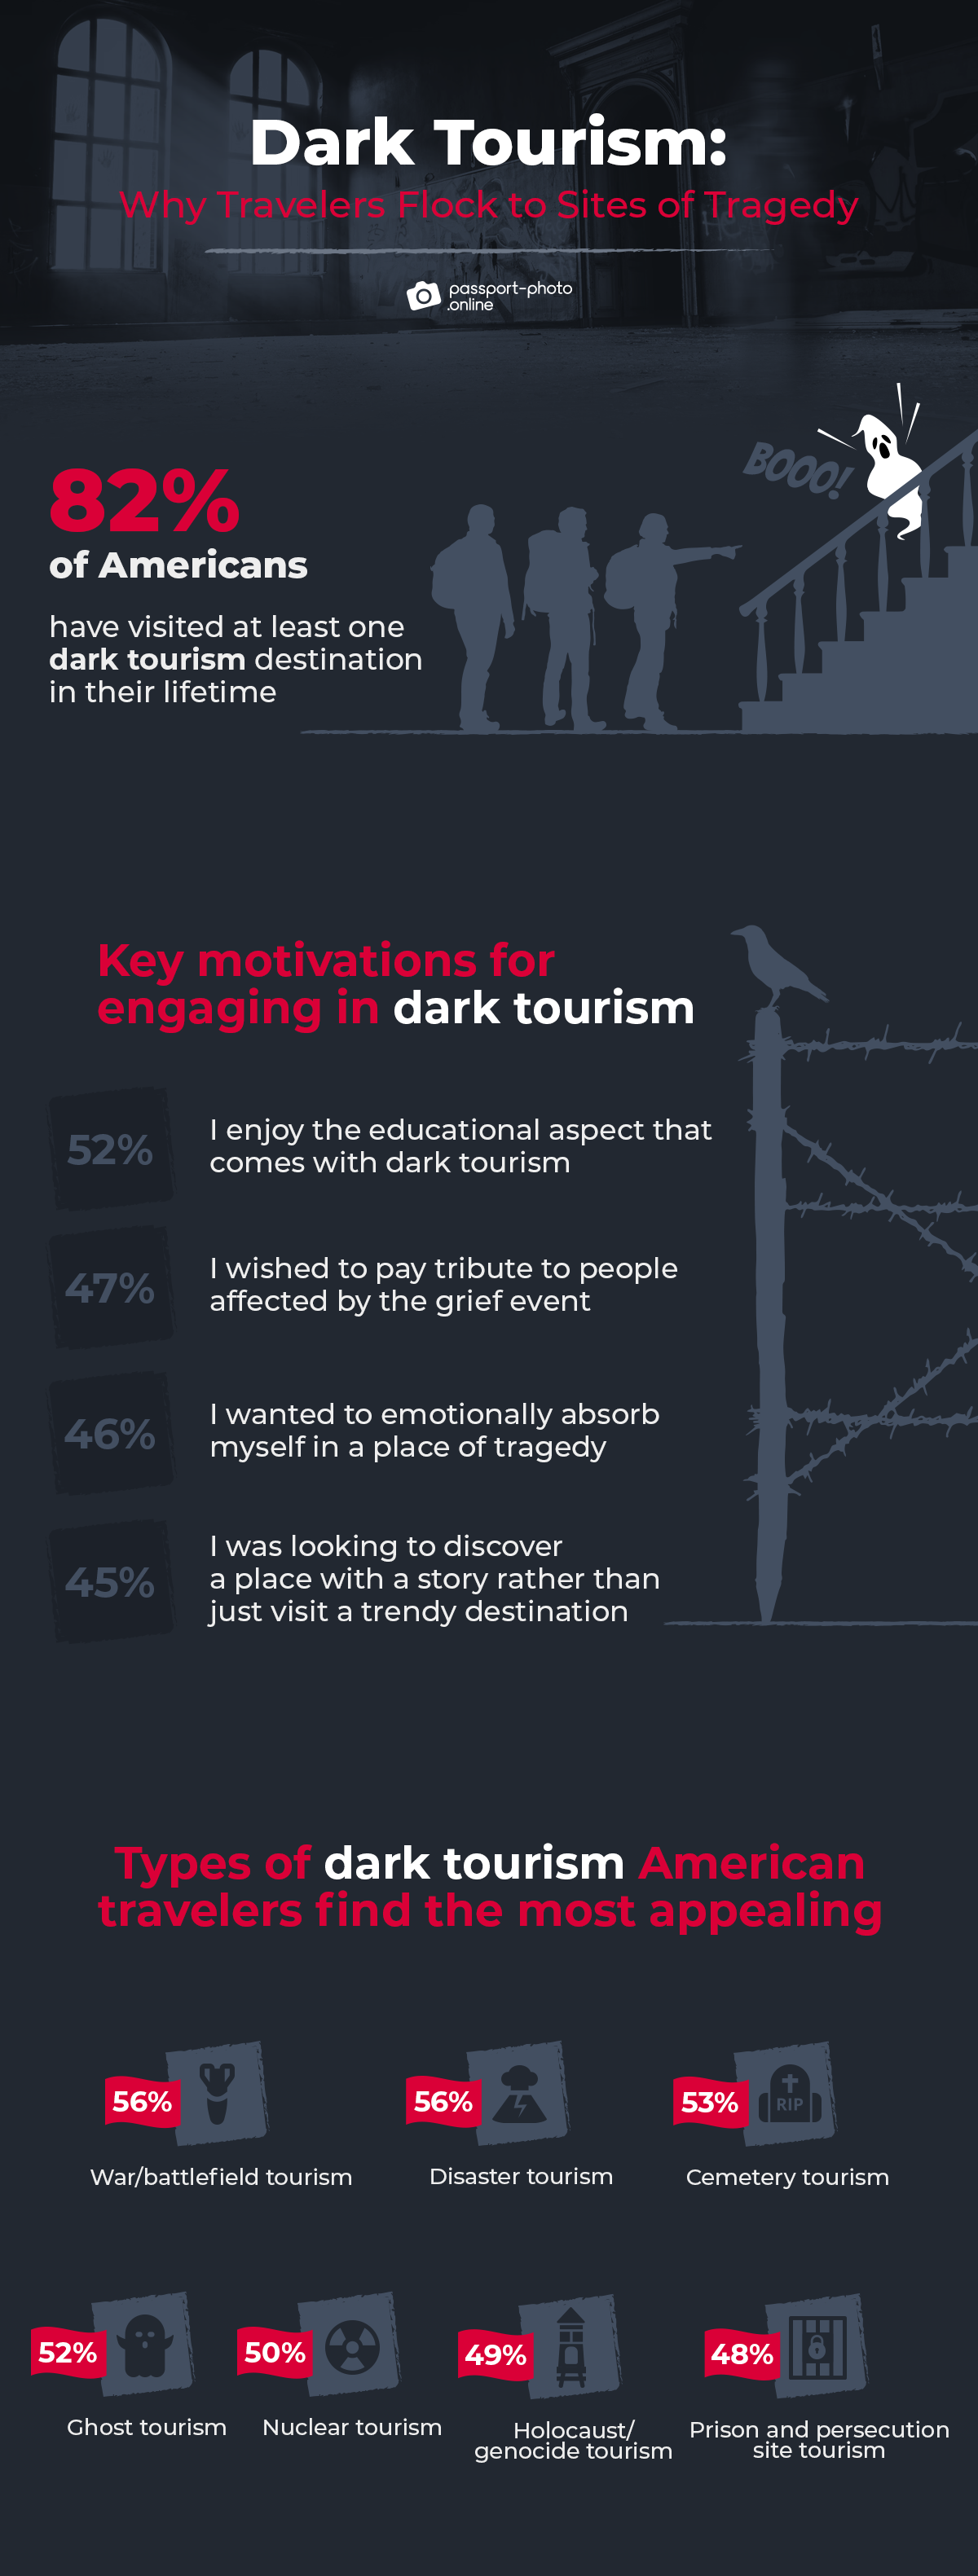 dark tourism: why travelers flock to sites of tragedy